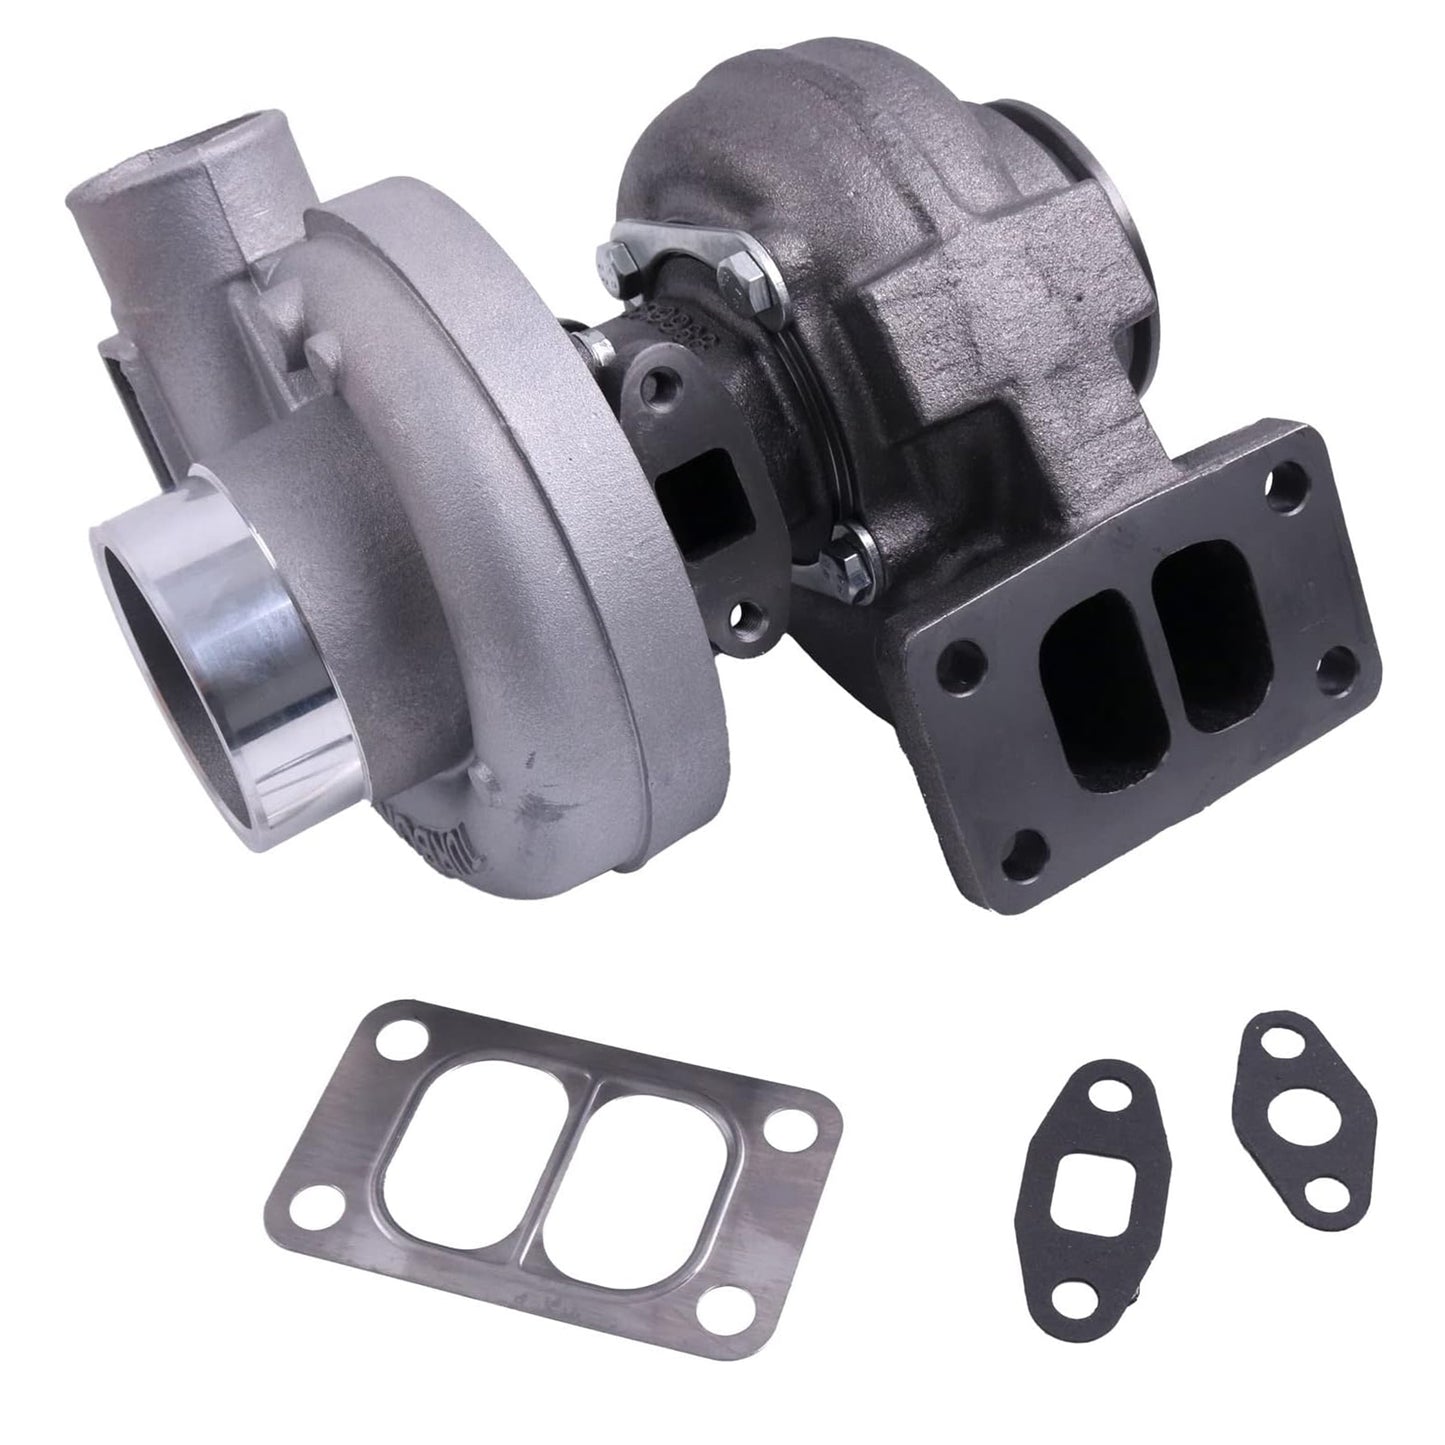 3522900 H1C Turbo Charger Compatible With Cummins 4TA-390 Diesel 4BT 3.9 Engine